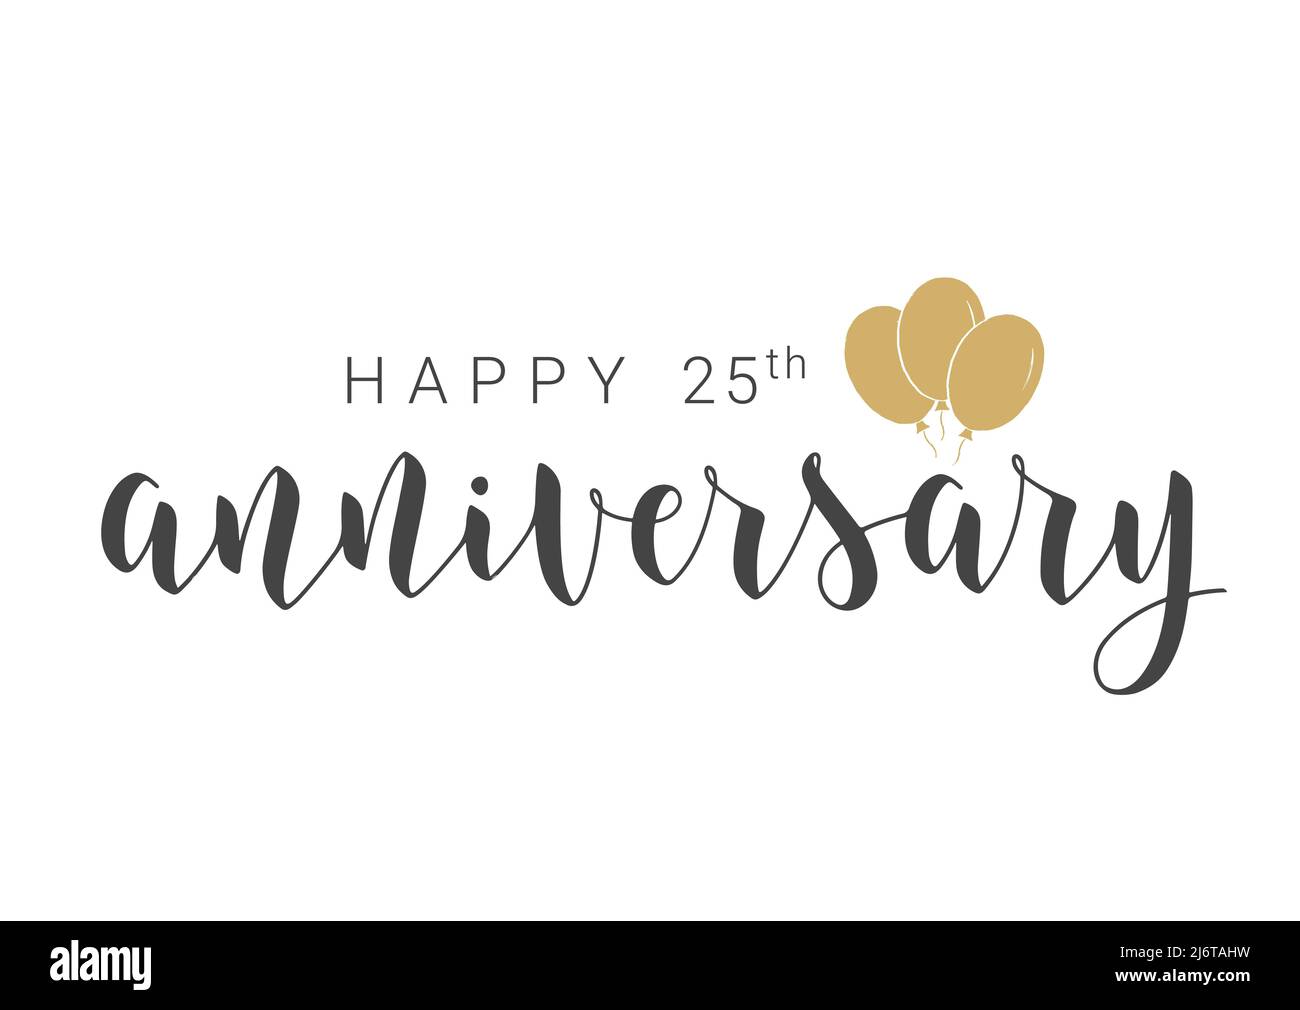 Handwritten Lettering Of Happy 25th Anniversary Template For Banner